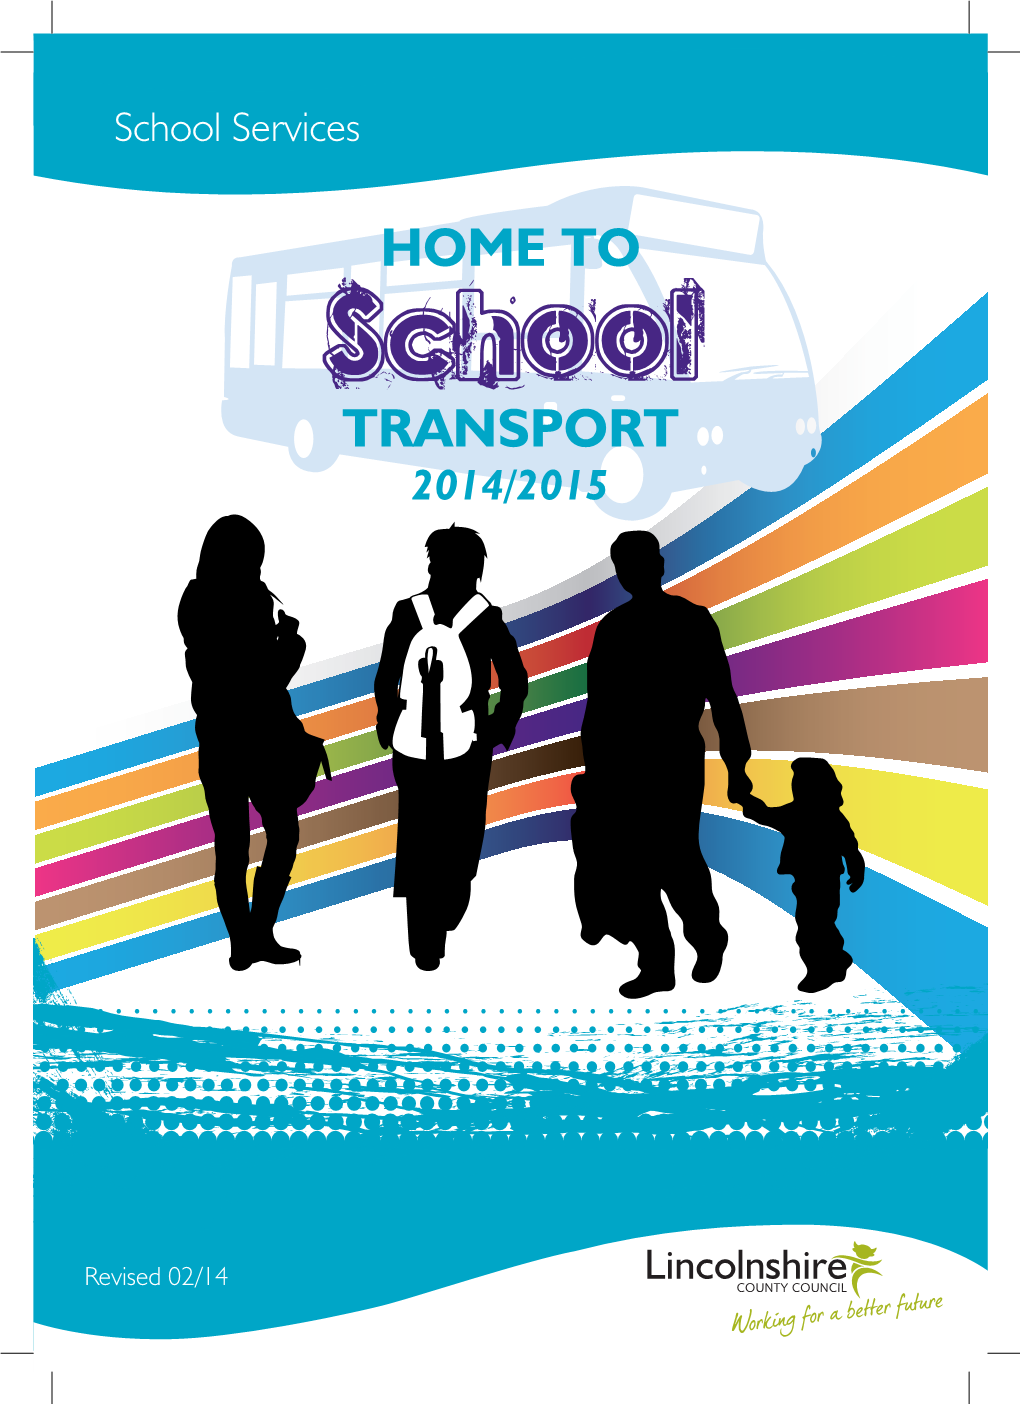 Home to Transport 2014/2015